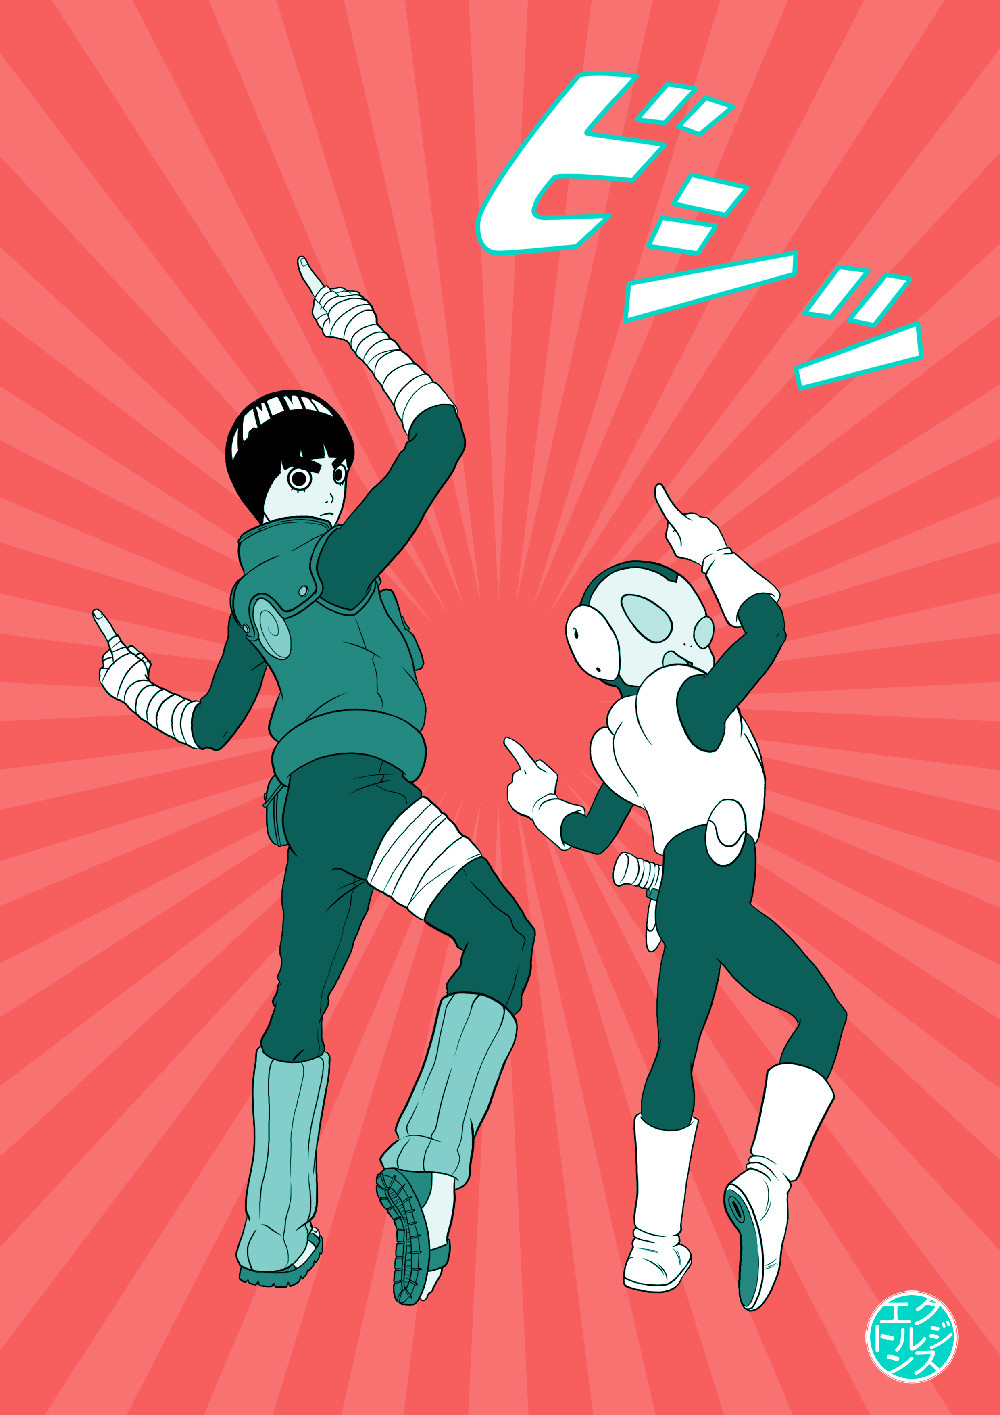 Hector Jenz - Jaco & Rock Lee Super Galactic Pose! 銀河パトロール ...